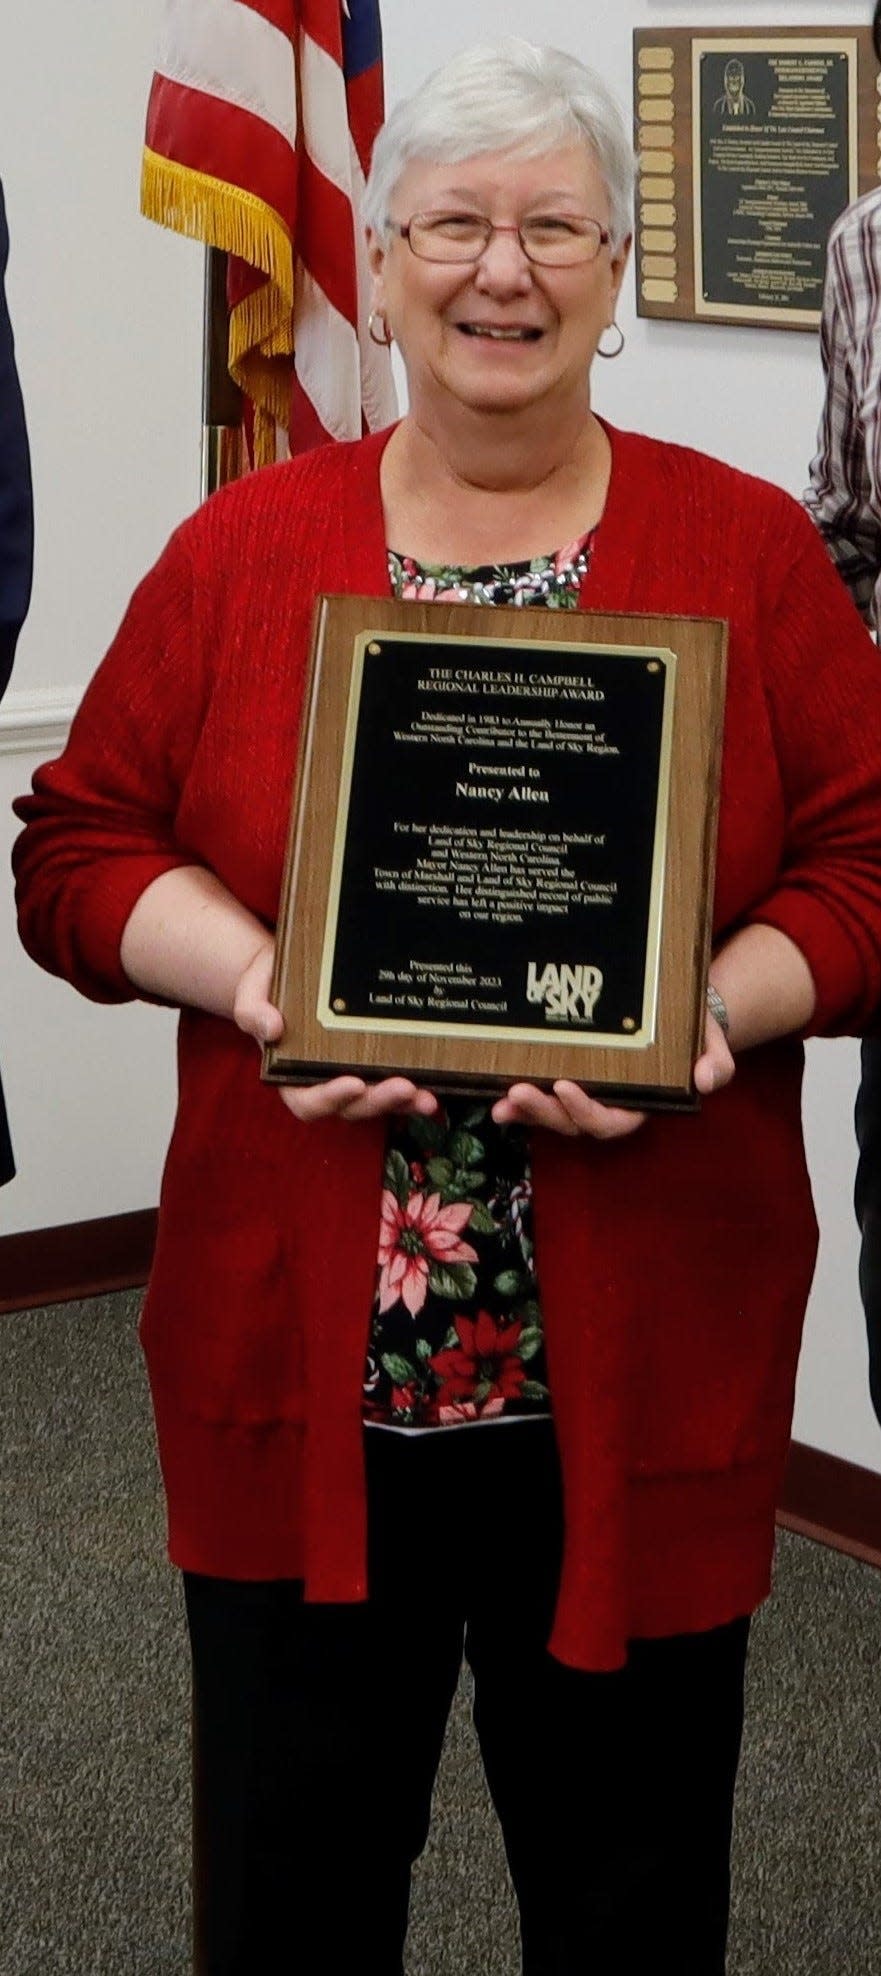 Nancy Allen was presented with the Land of Sky Regional Council's Charles H. Campbell Award for regional leadership Nov. 29.